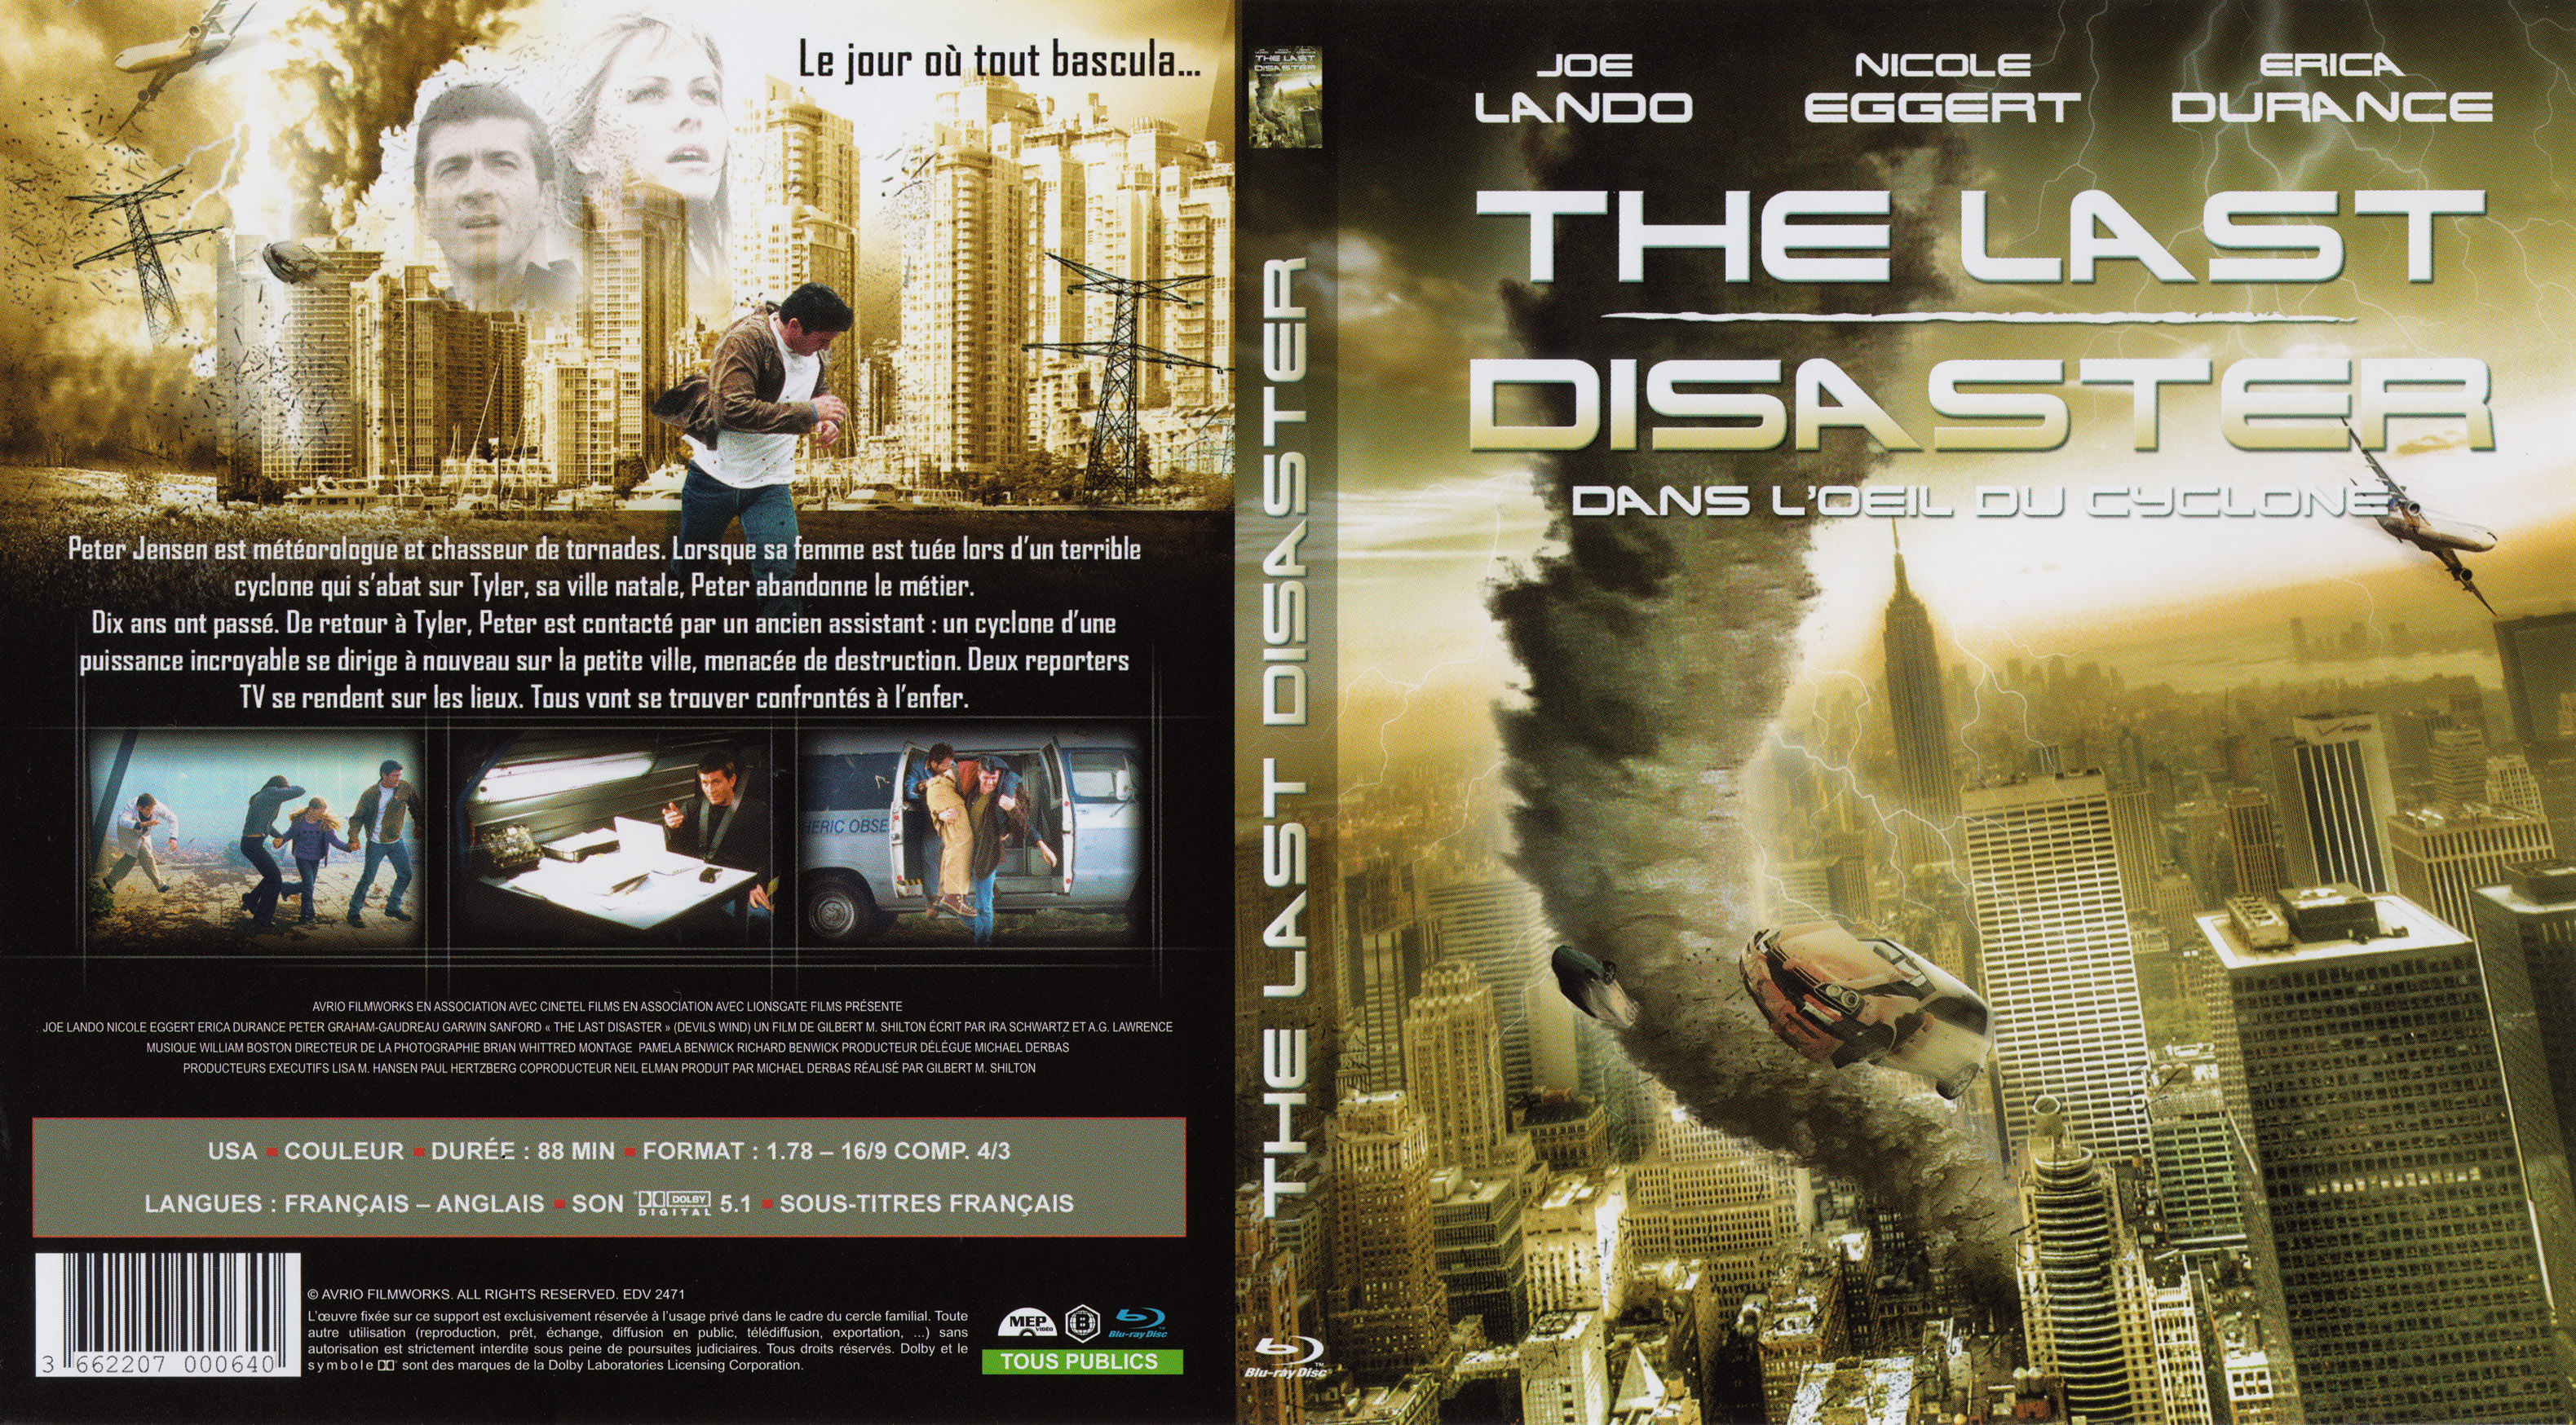 Jaquette DVD The last disaster (BLU-RAY)